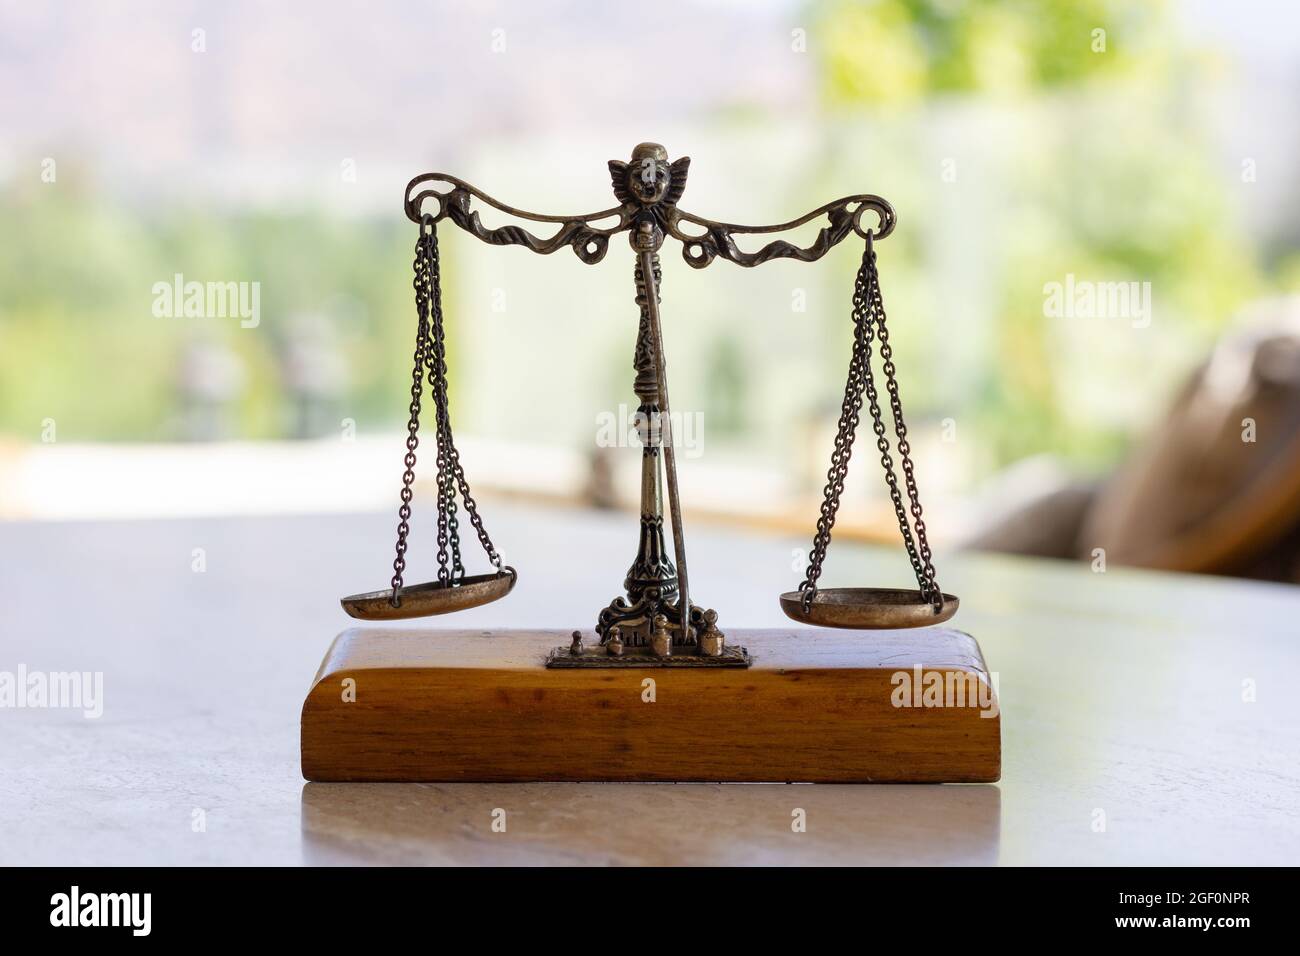 https://c8.alamy.com/comp/2GF0NPR/weighing-scale-miniature-weigh-instrument-law-justice-concepts-2GF0NPR.jpg